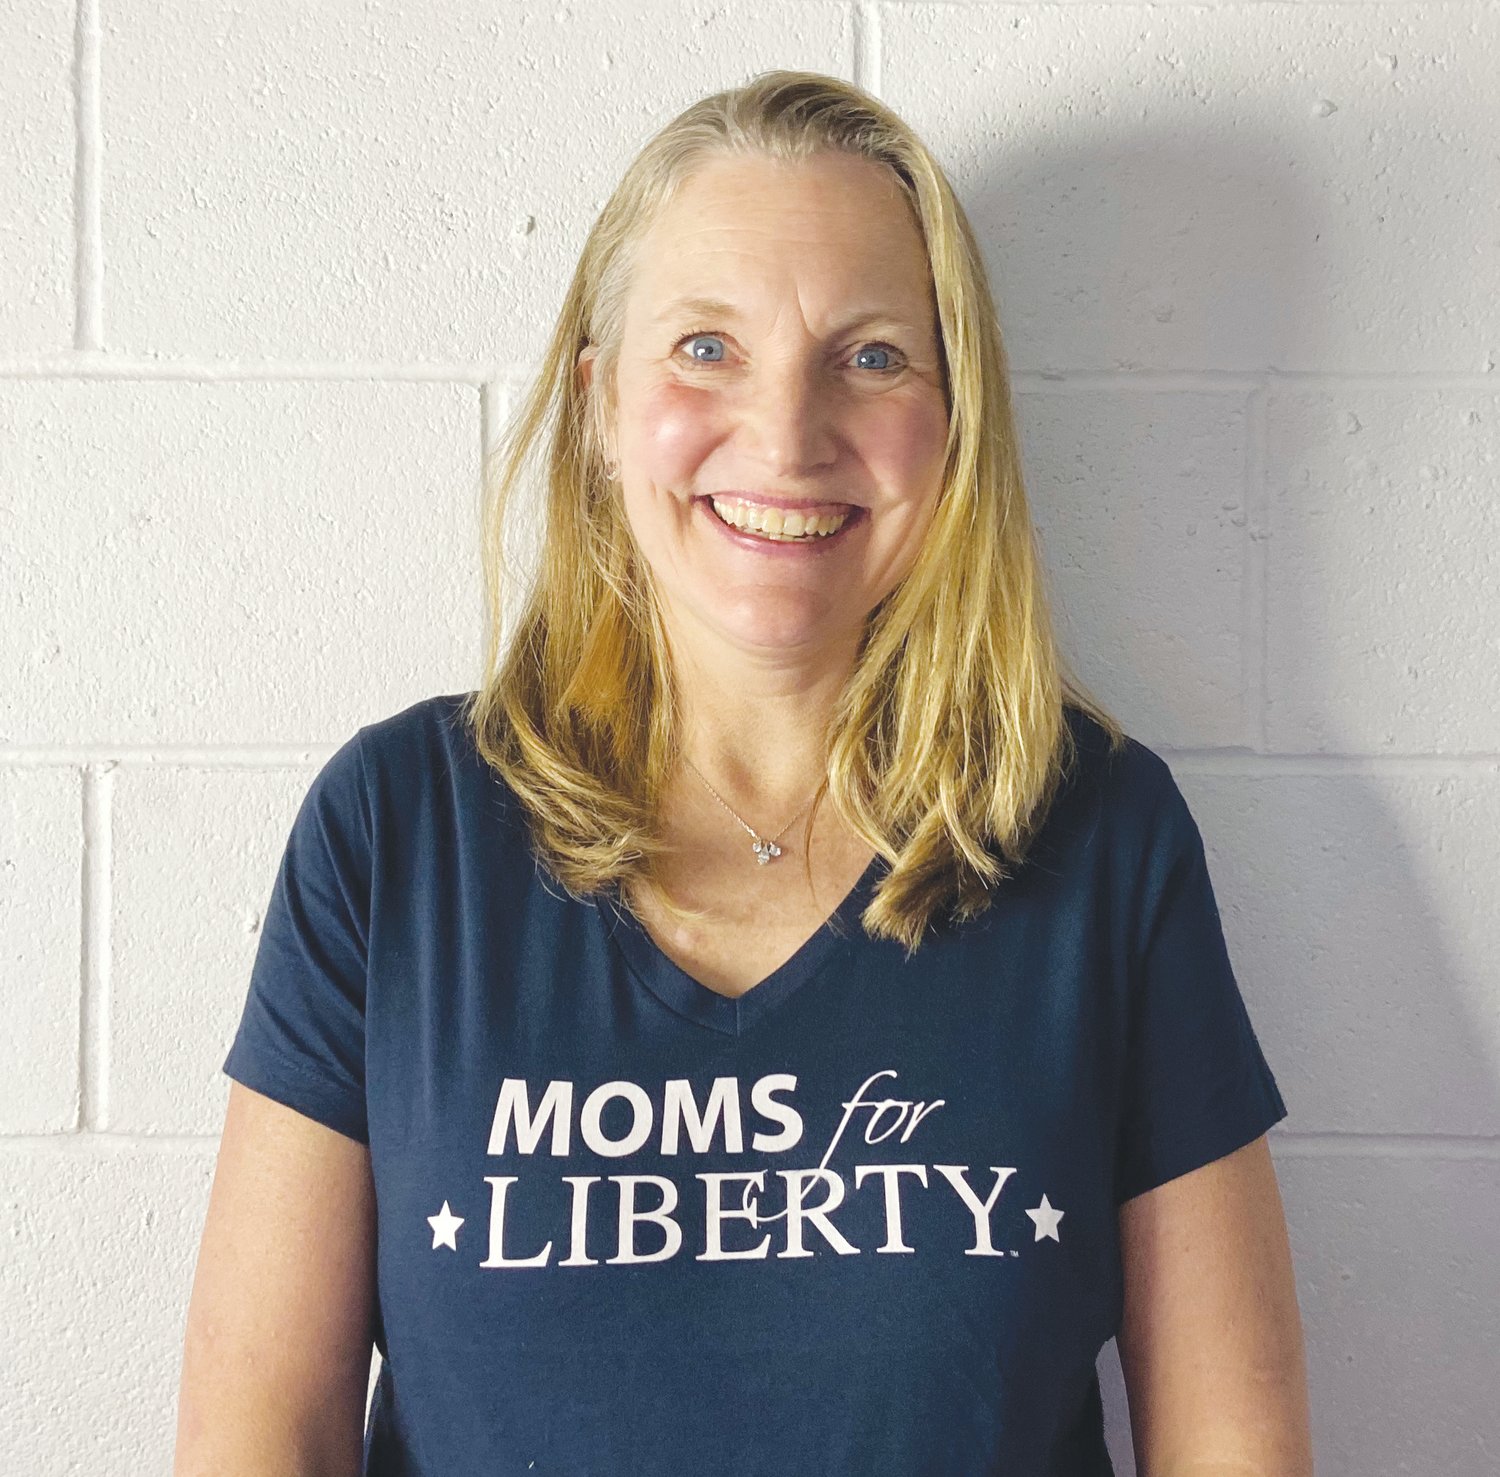 Amy Kappelman, who started Chatham's 'Moms for Liberty' chapter.